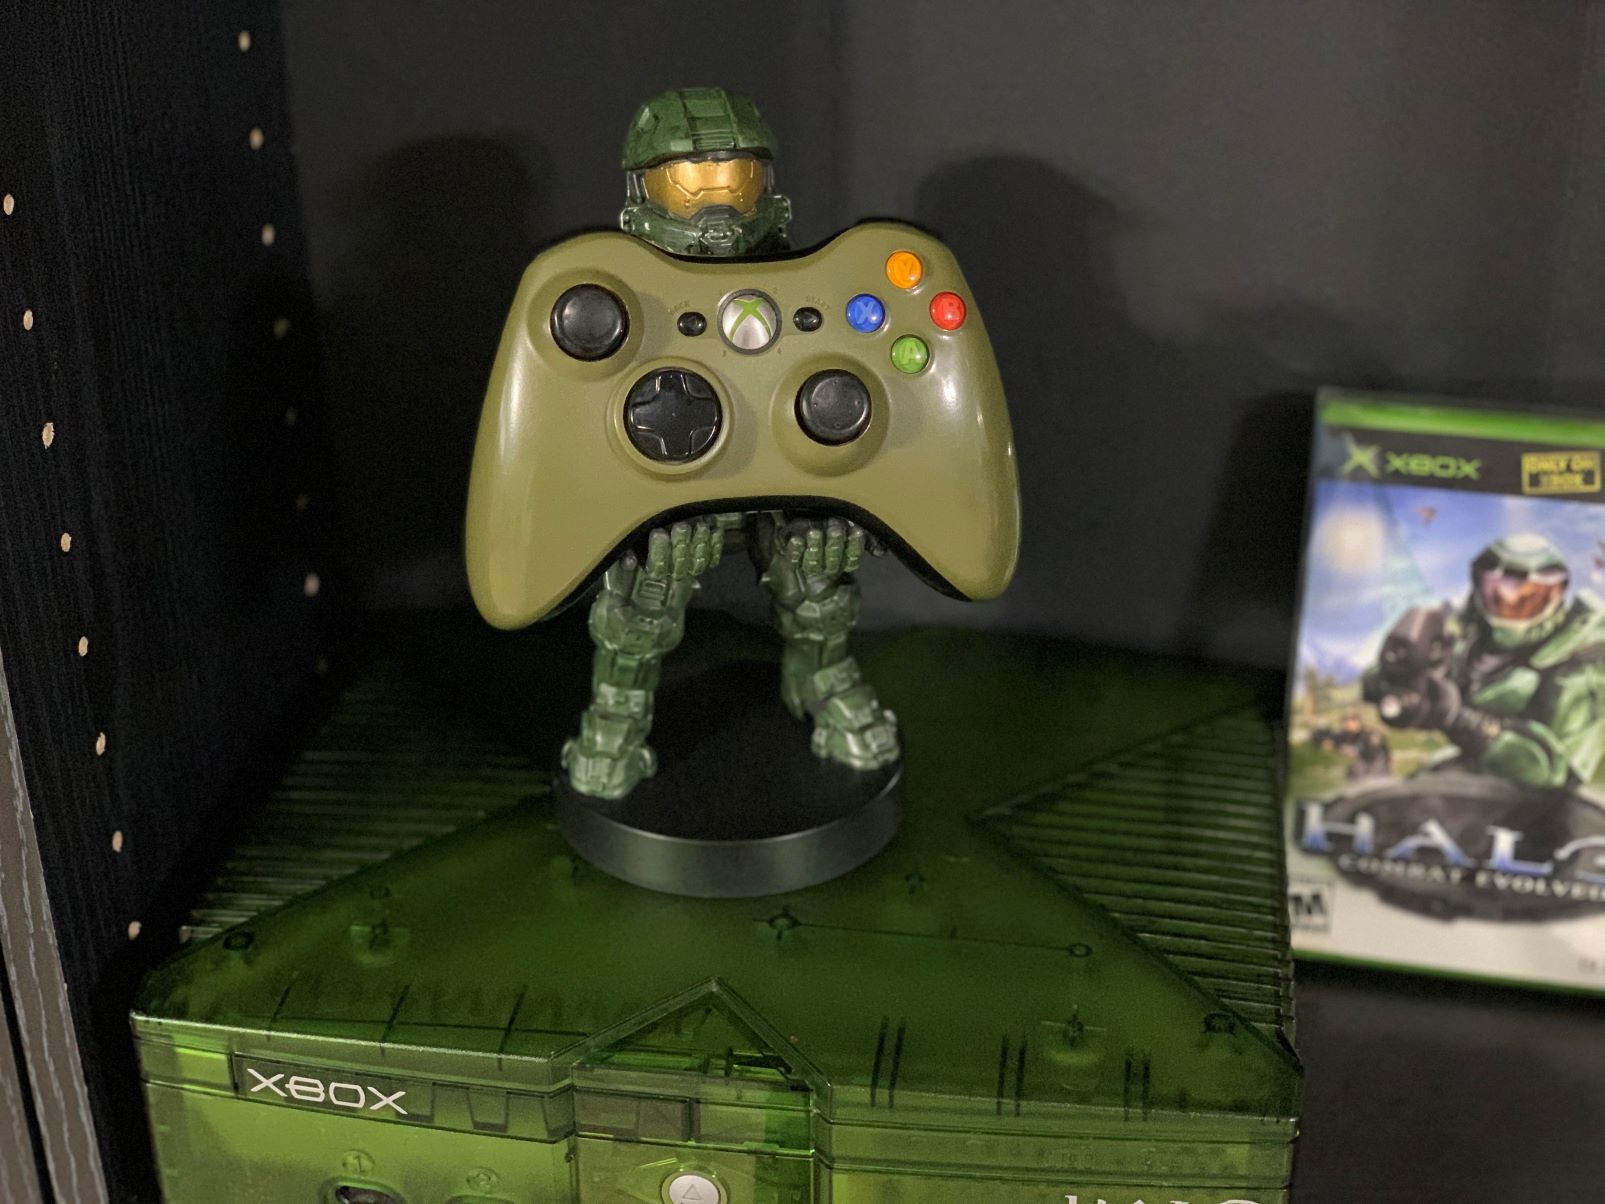 How Do You Pair A New Xbox Wireless Game Controller To An Xbox 360